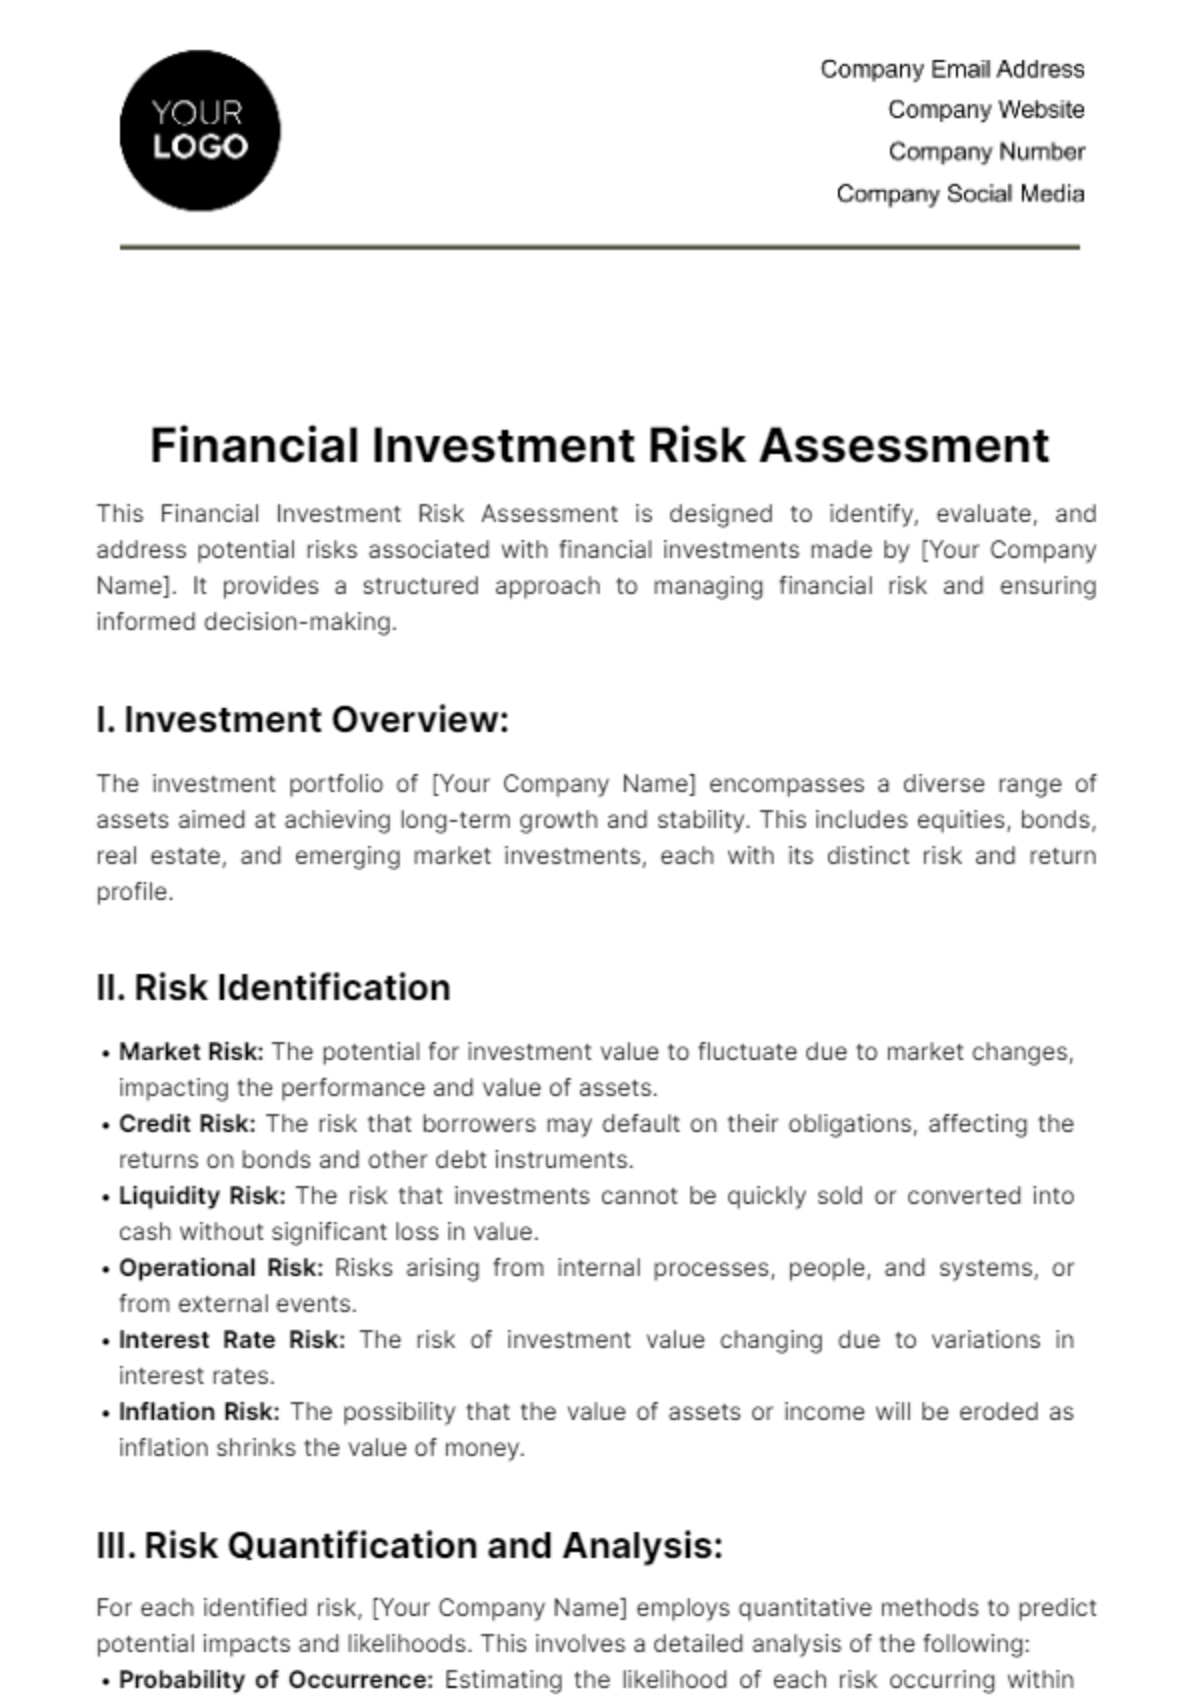 Financial Investment Risk Assessment Template